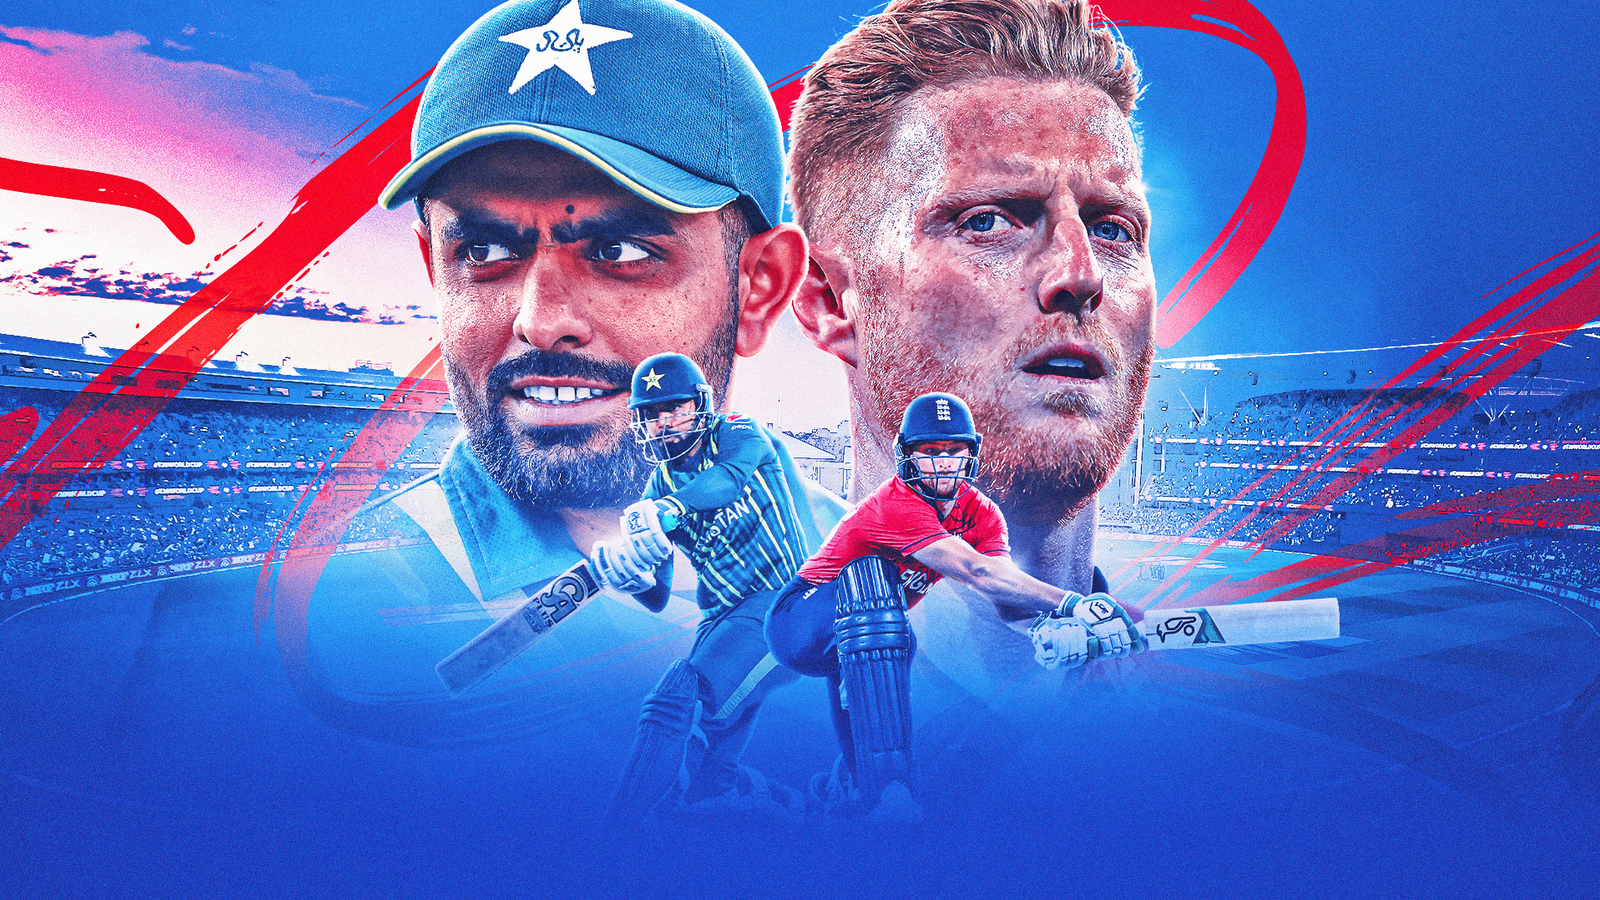 England bowl vs Pakistan in T20 World Cup final LIVE!